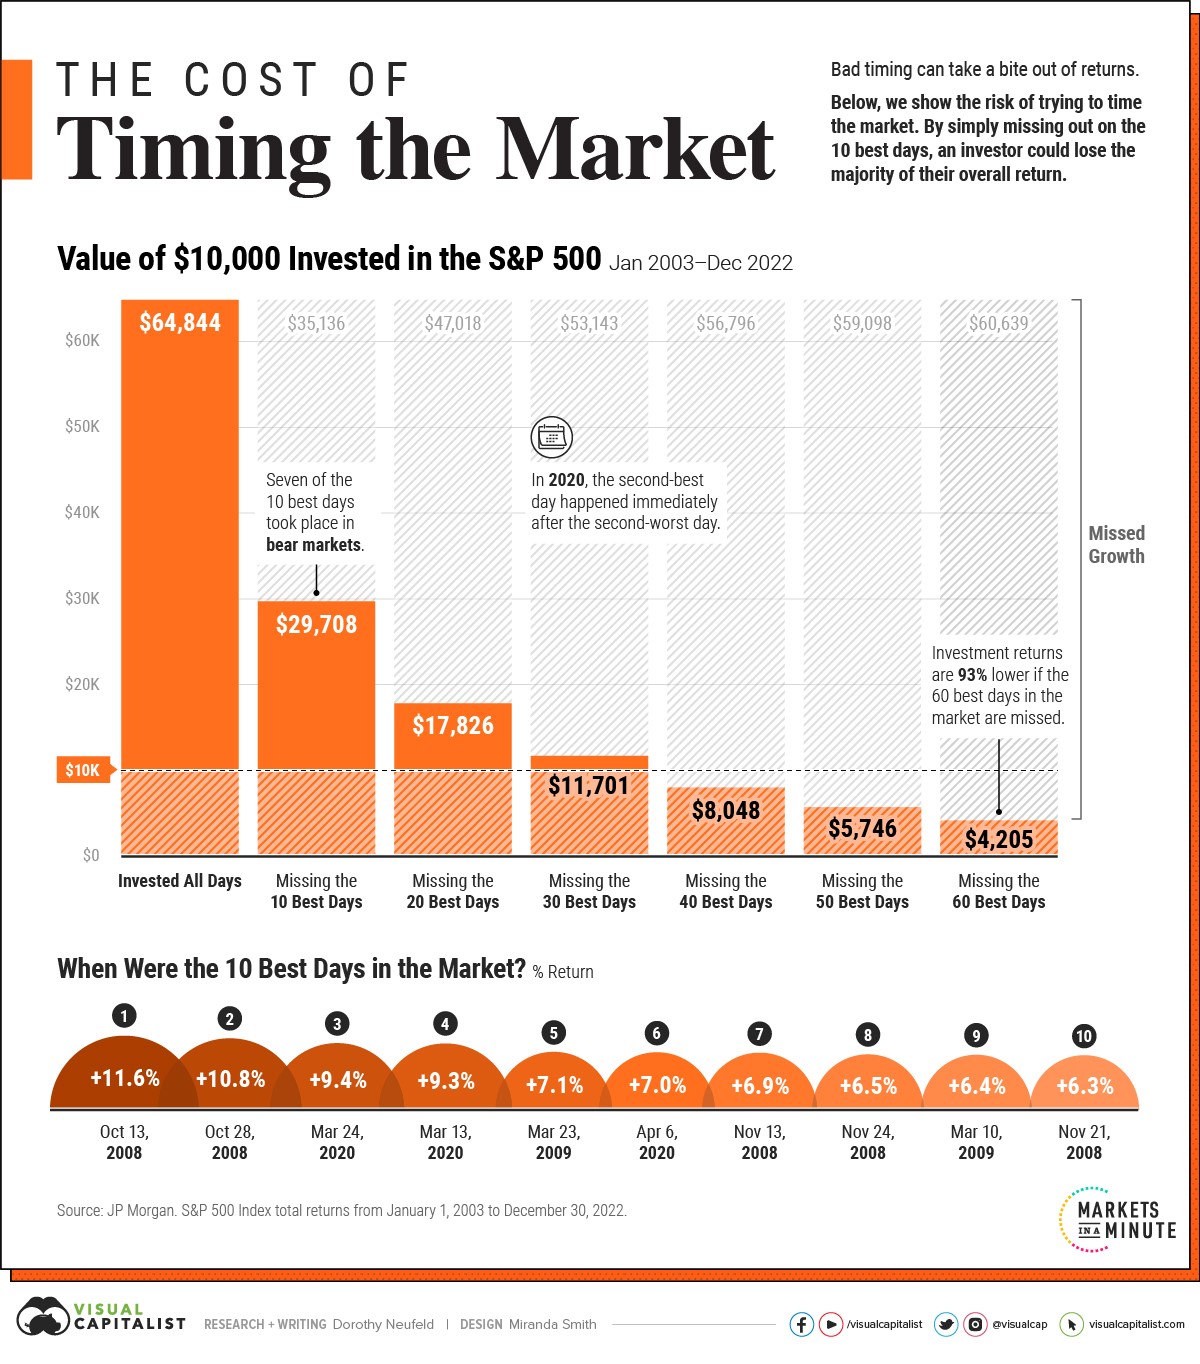 Orange bar chart shows the impact of timing the market. Investment totals range from nearly $65,000 to only about $4,000